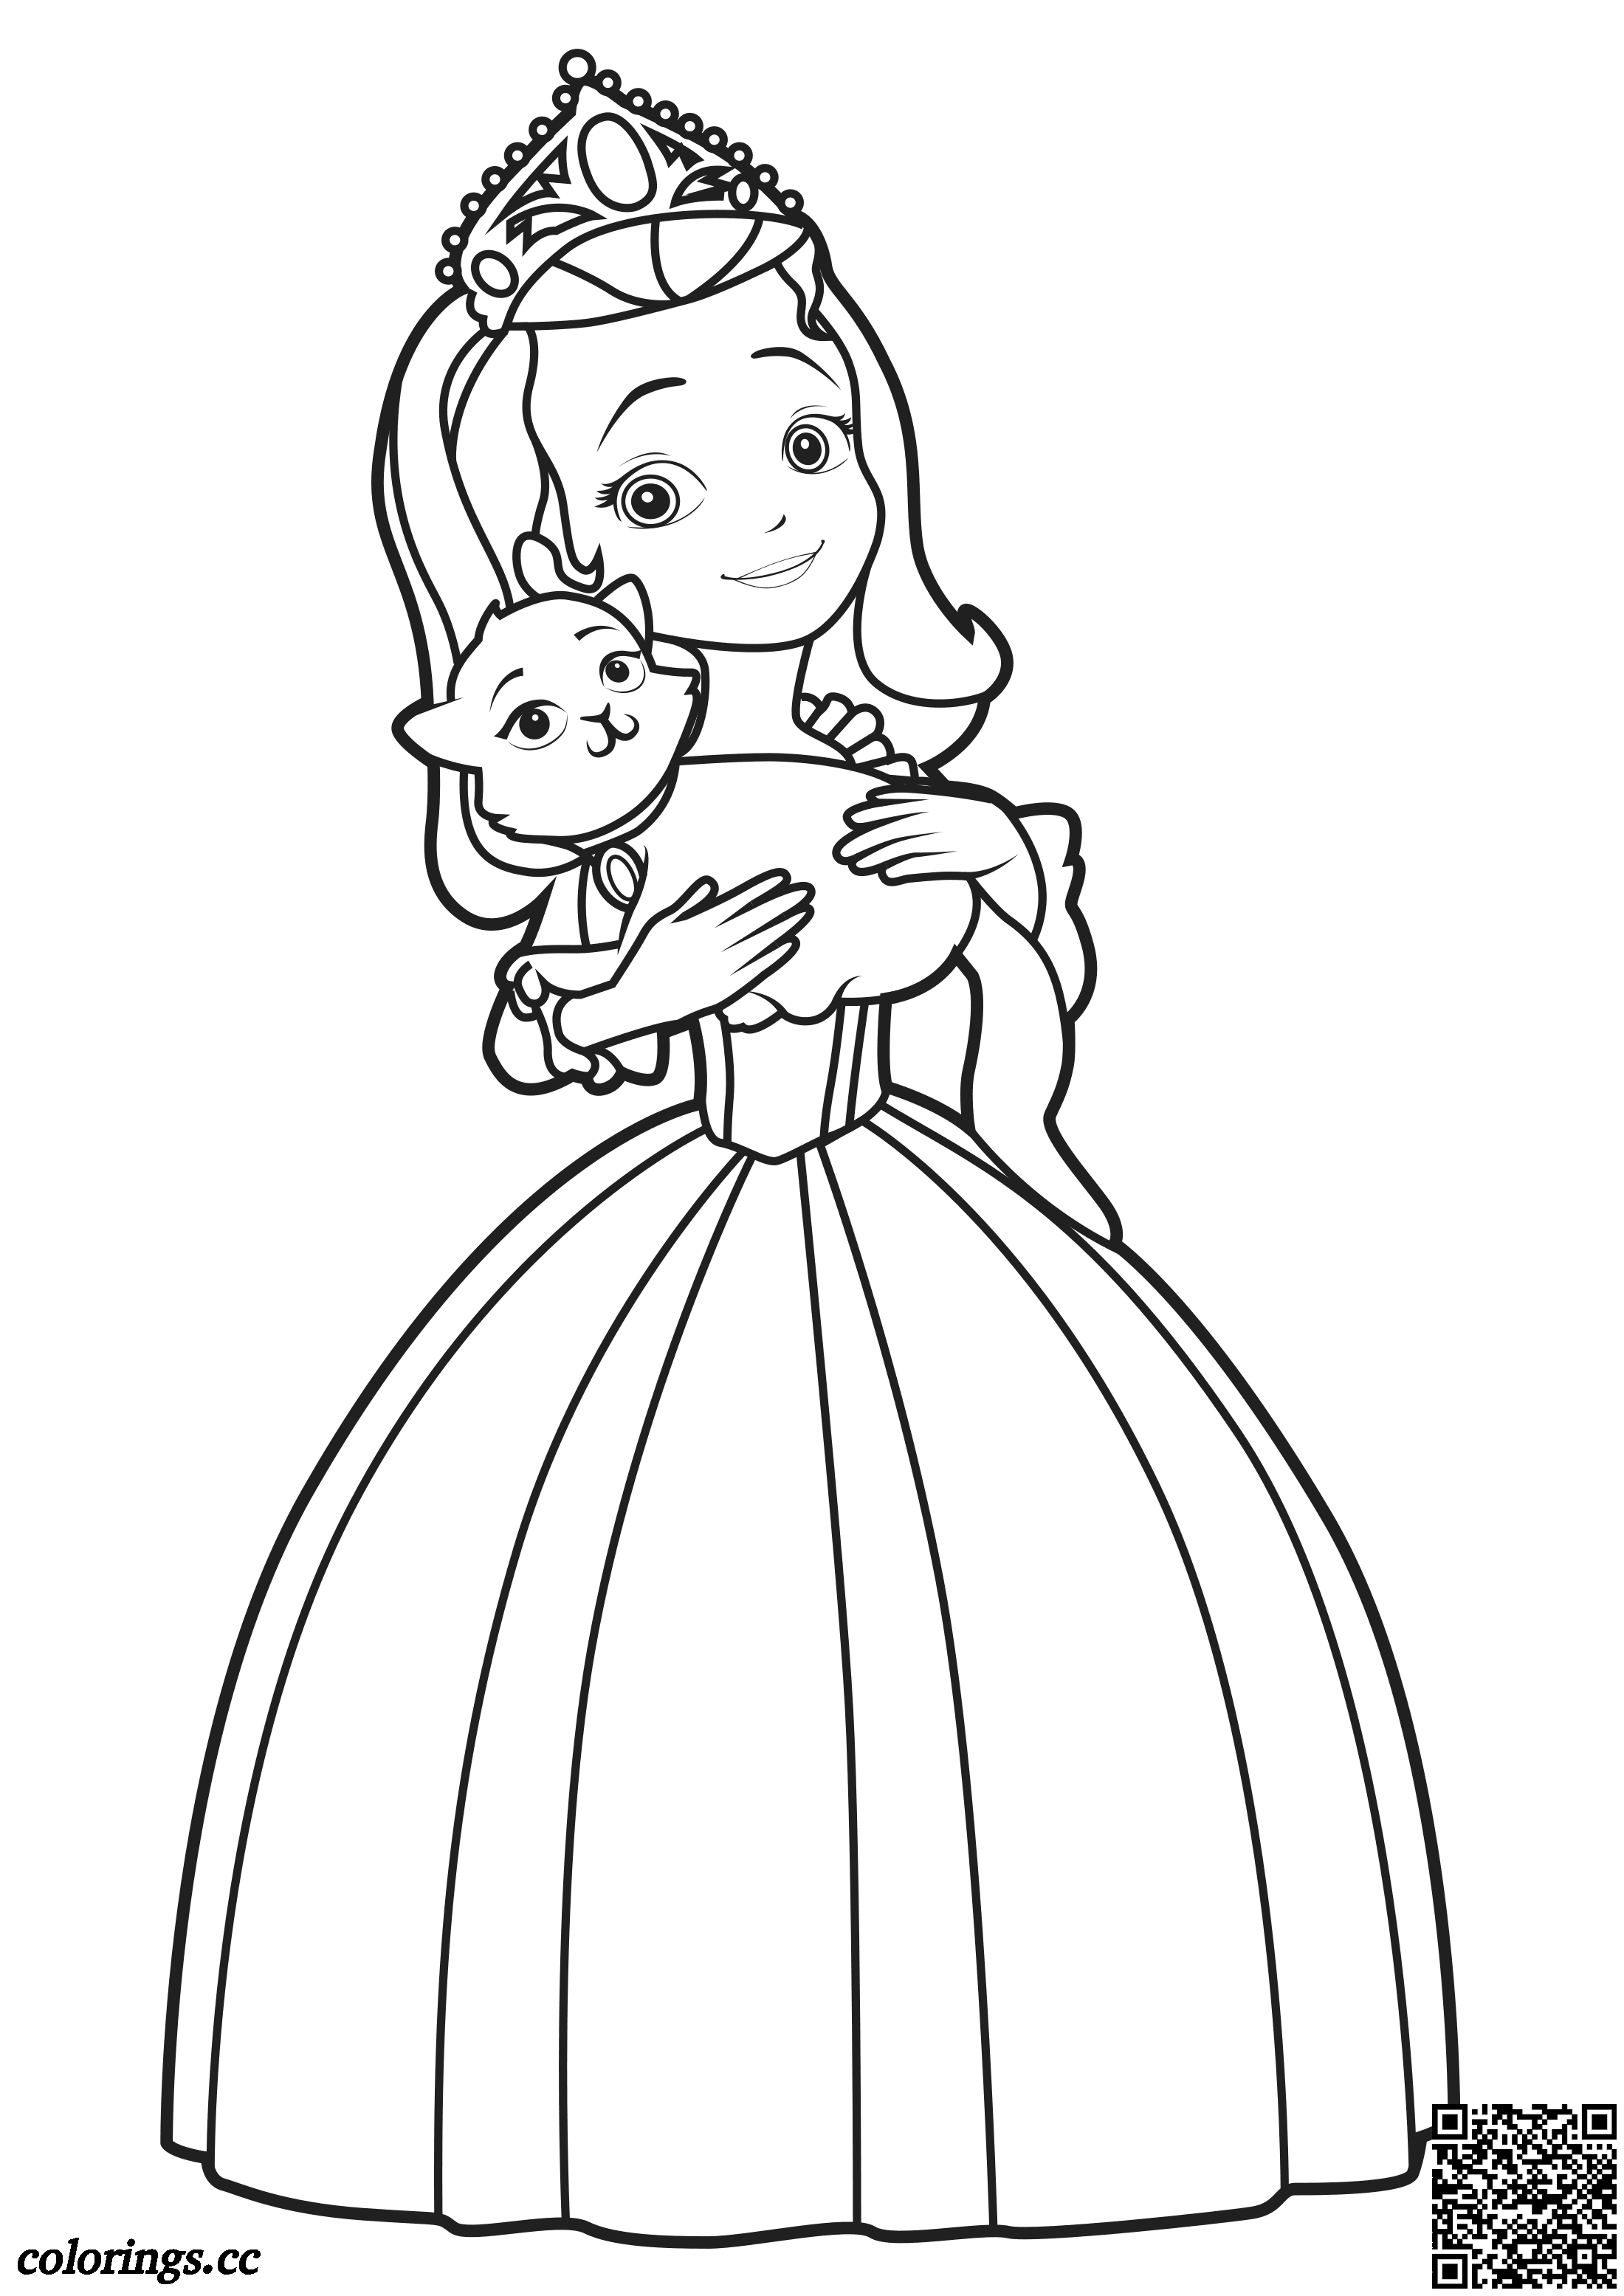 Princess Amber with a kitten coloring pages, Sofia the First ...